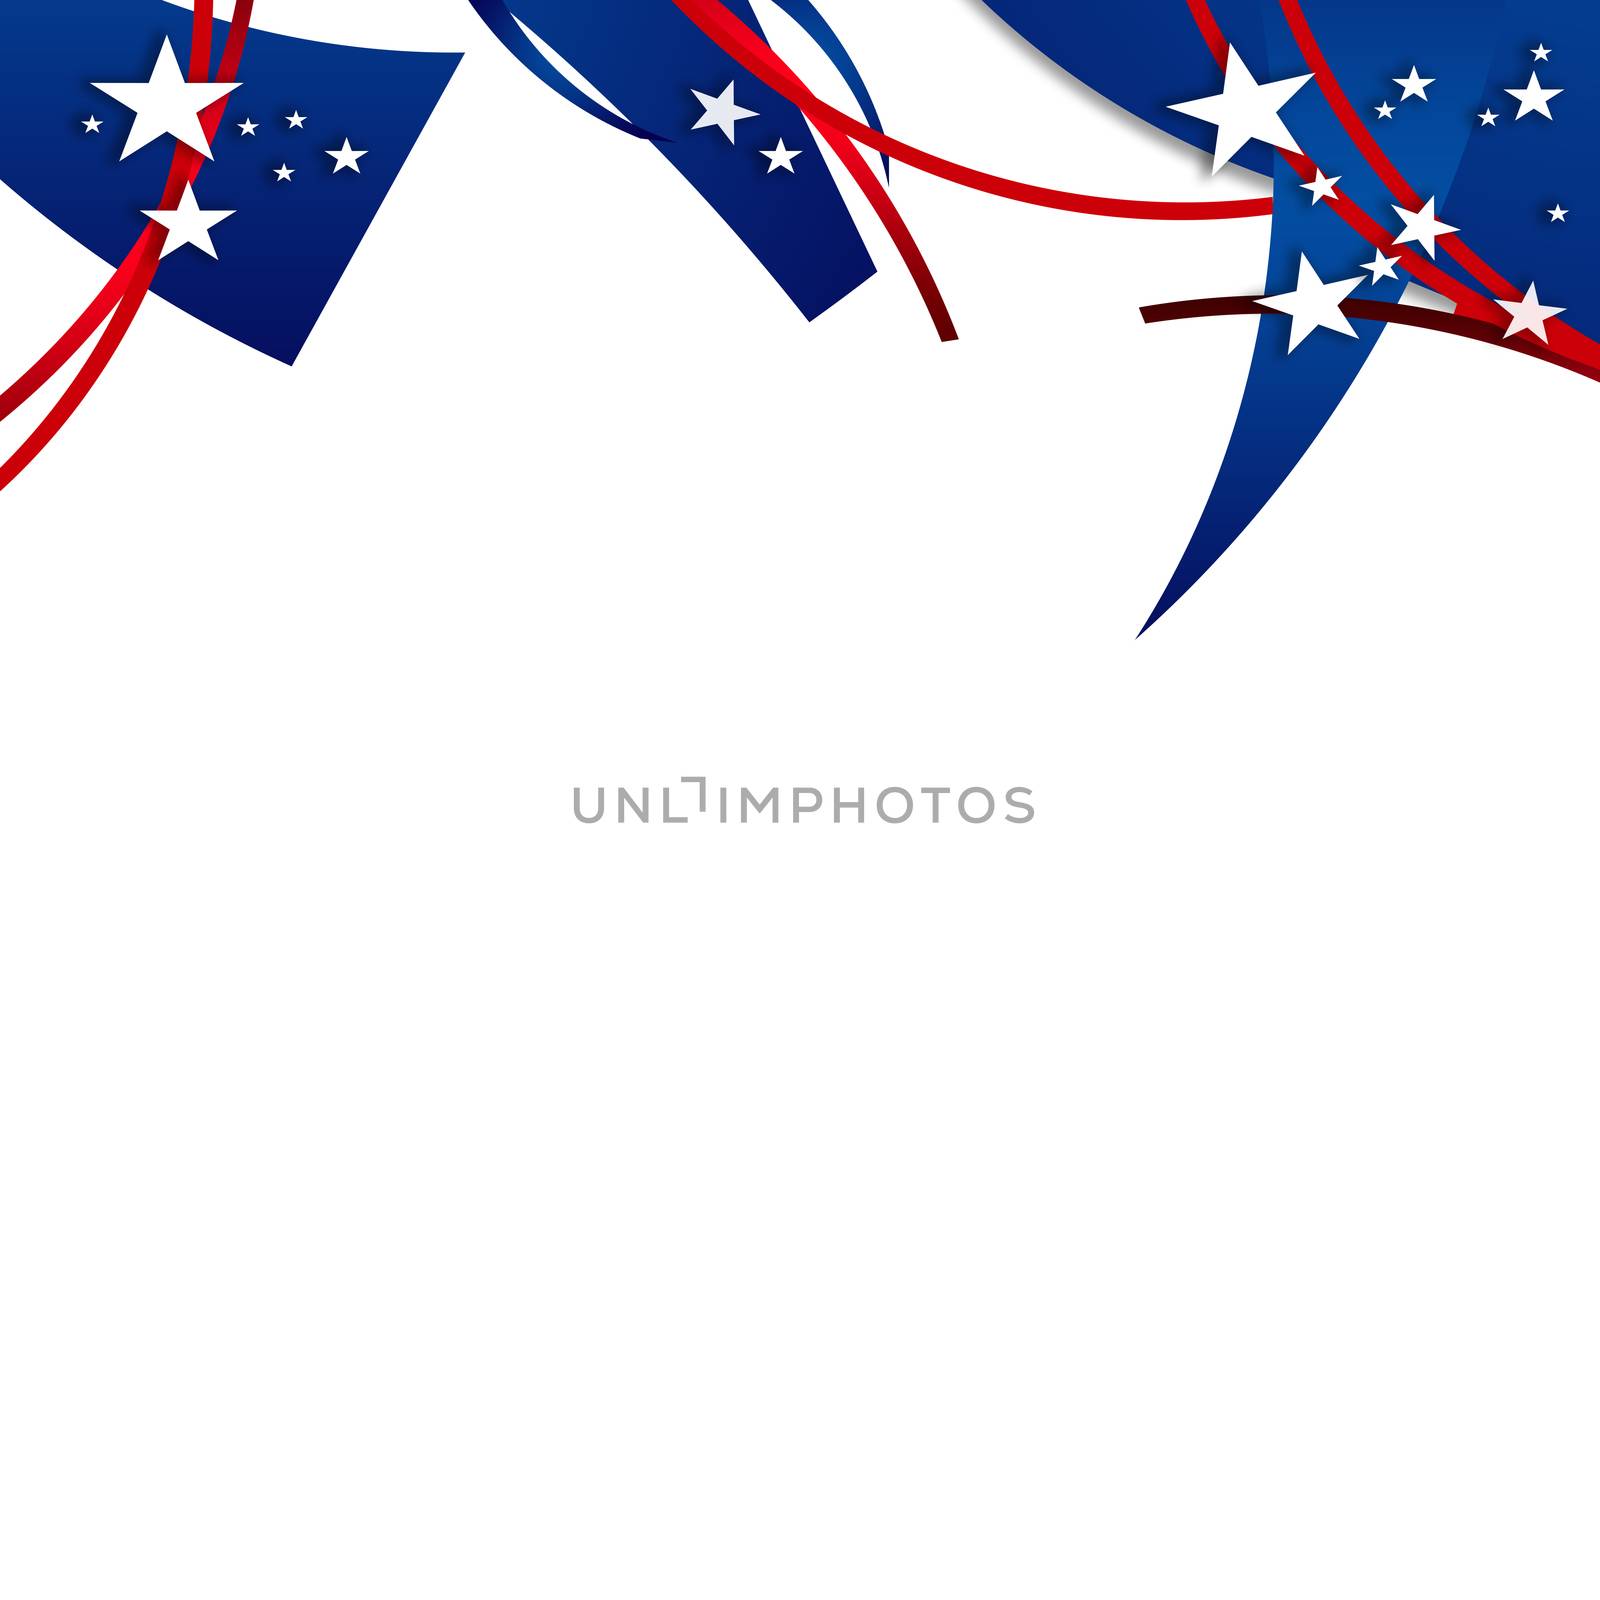 American Patriotic Background by tharun15